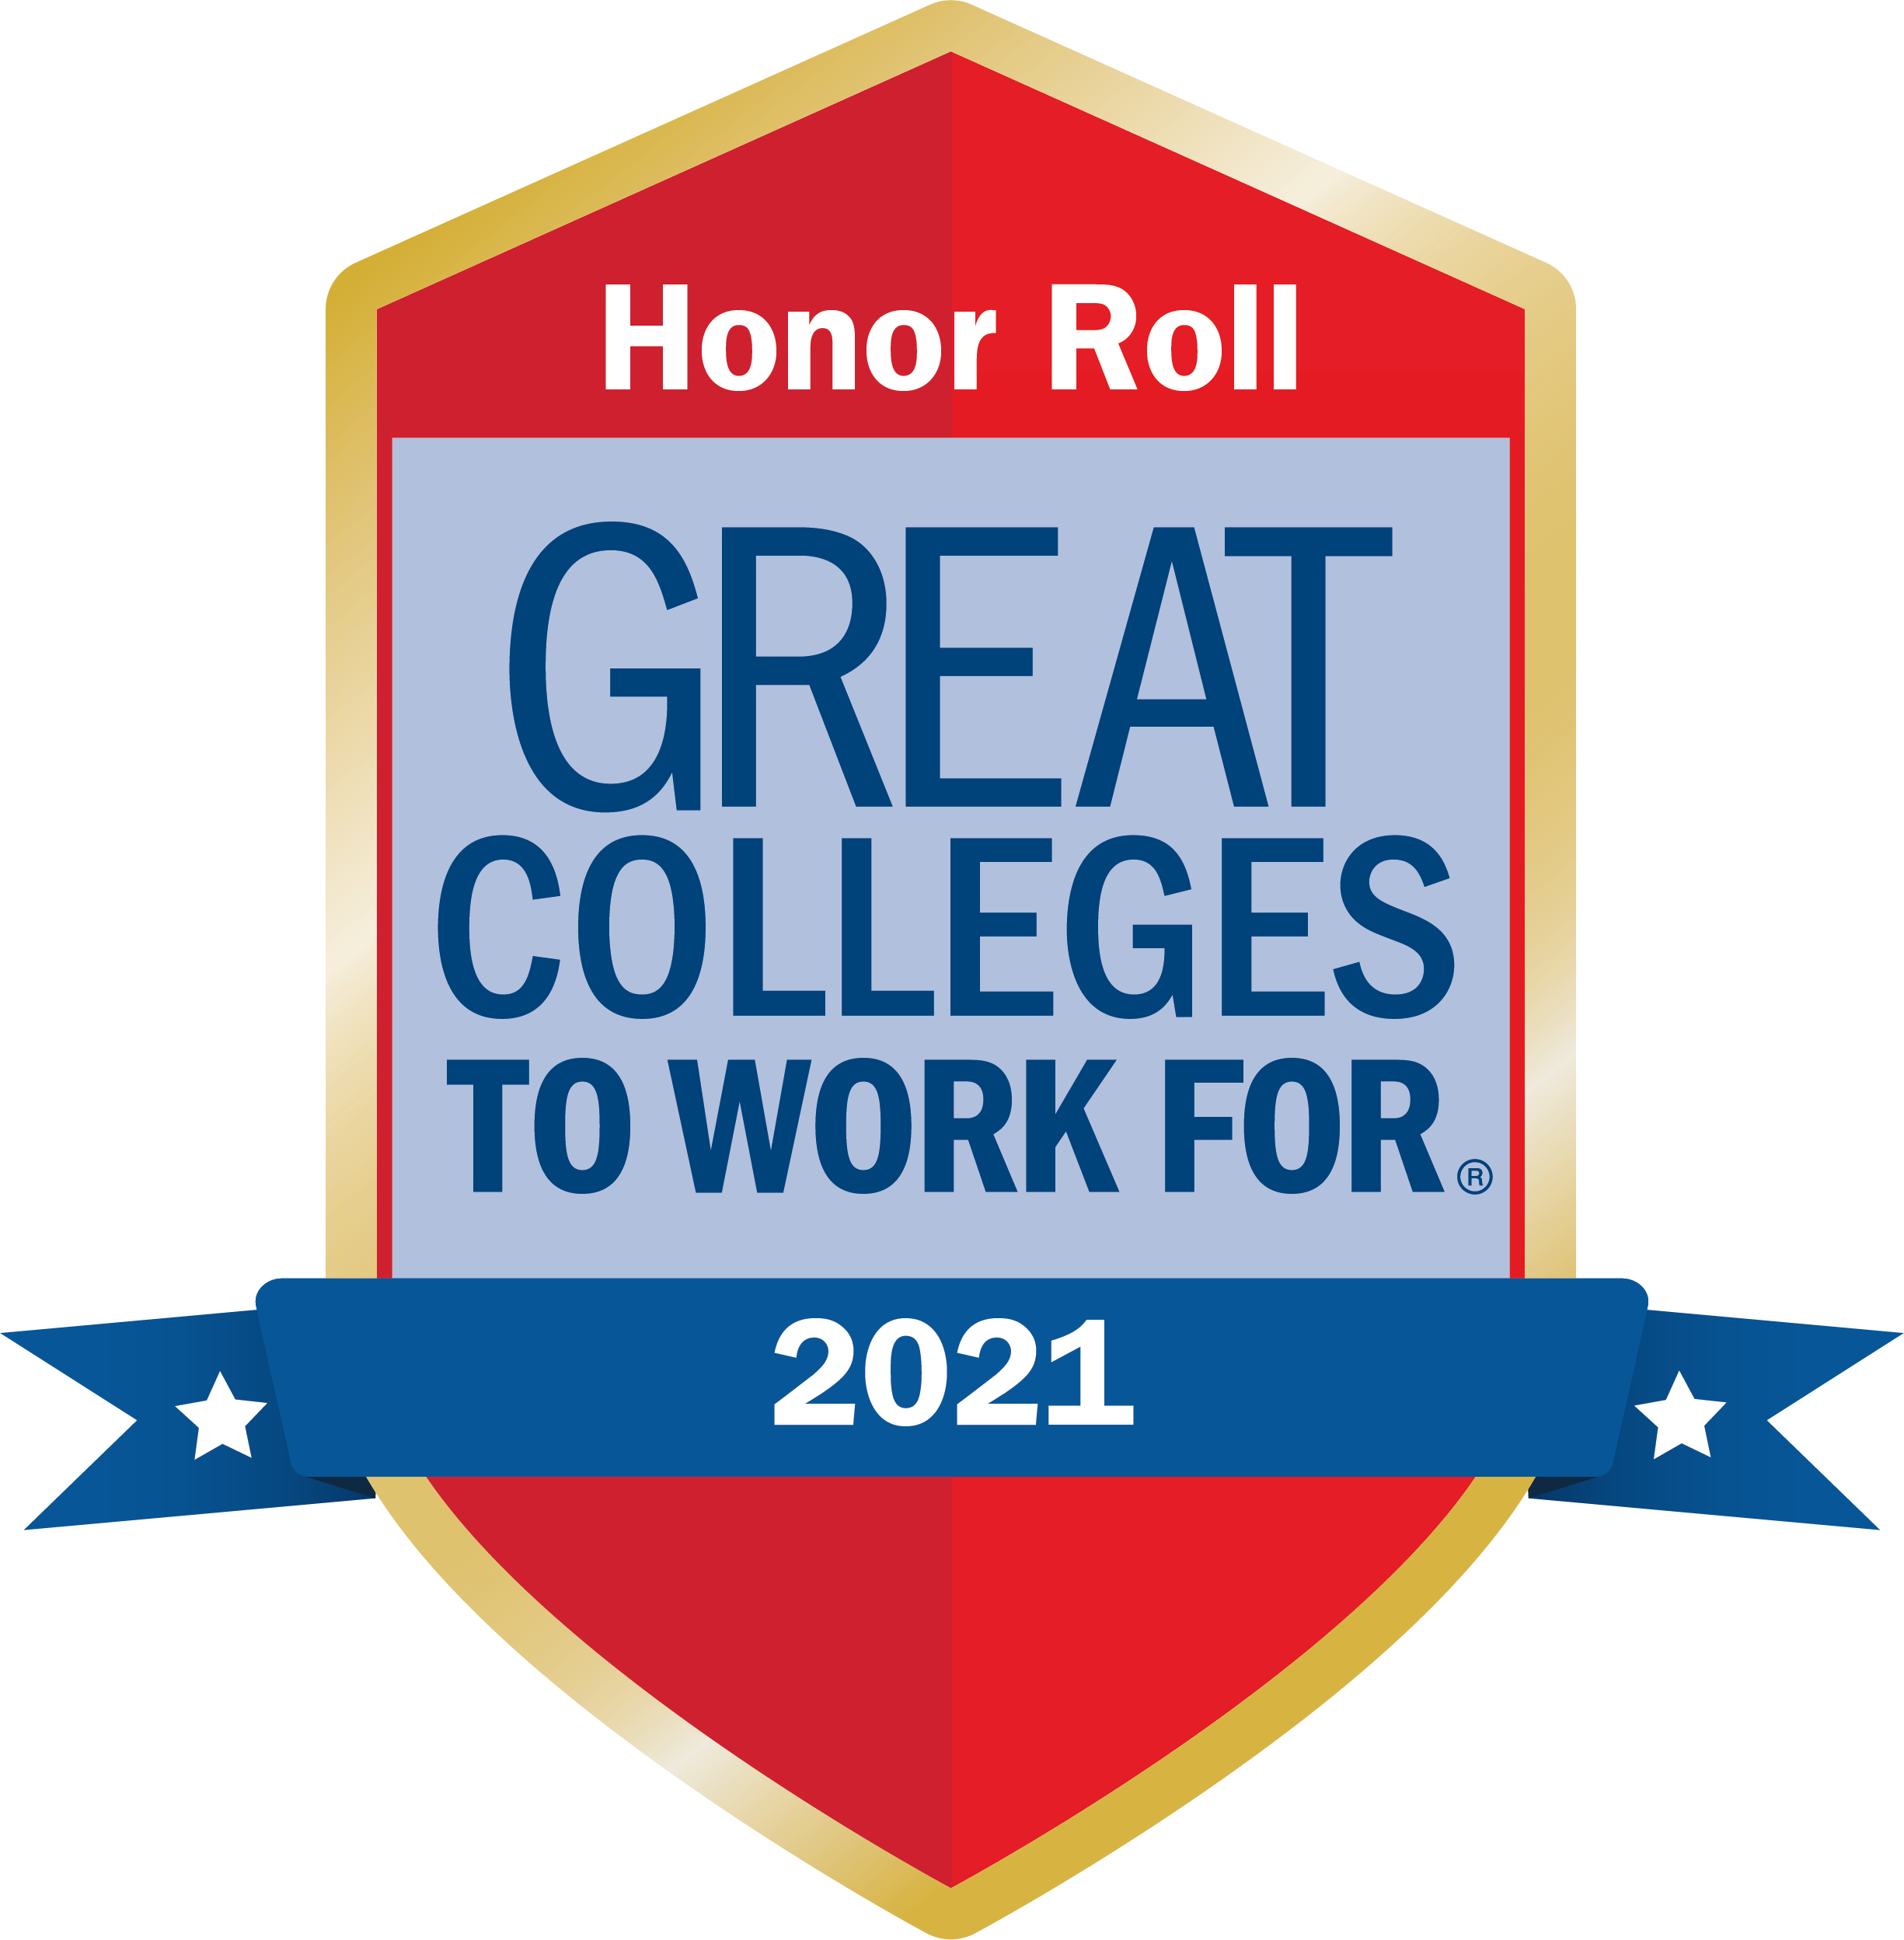 Great College Honor Roll logo